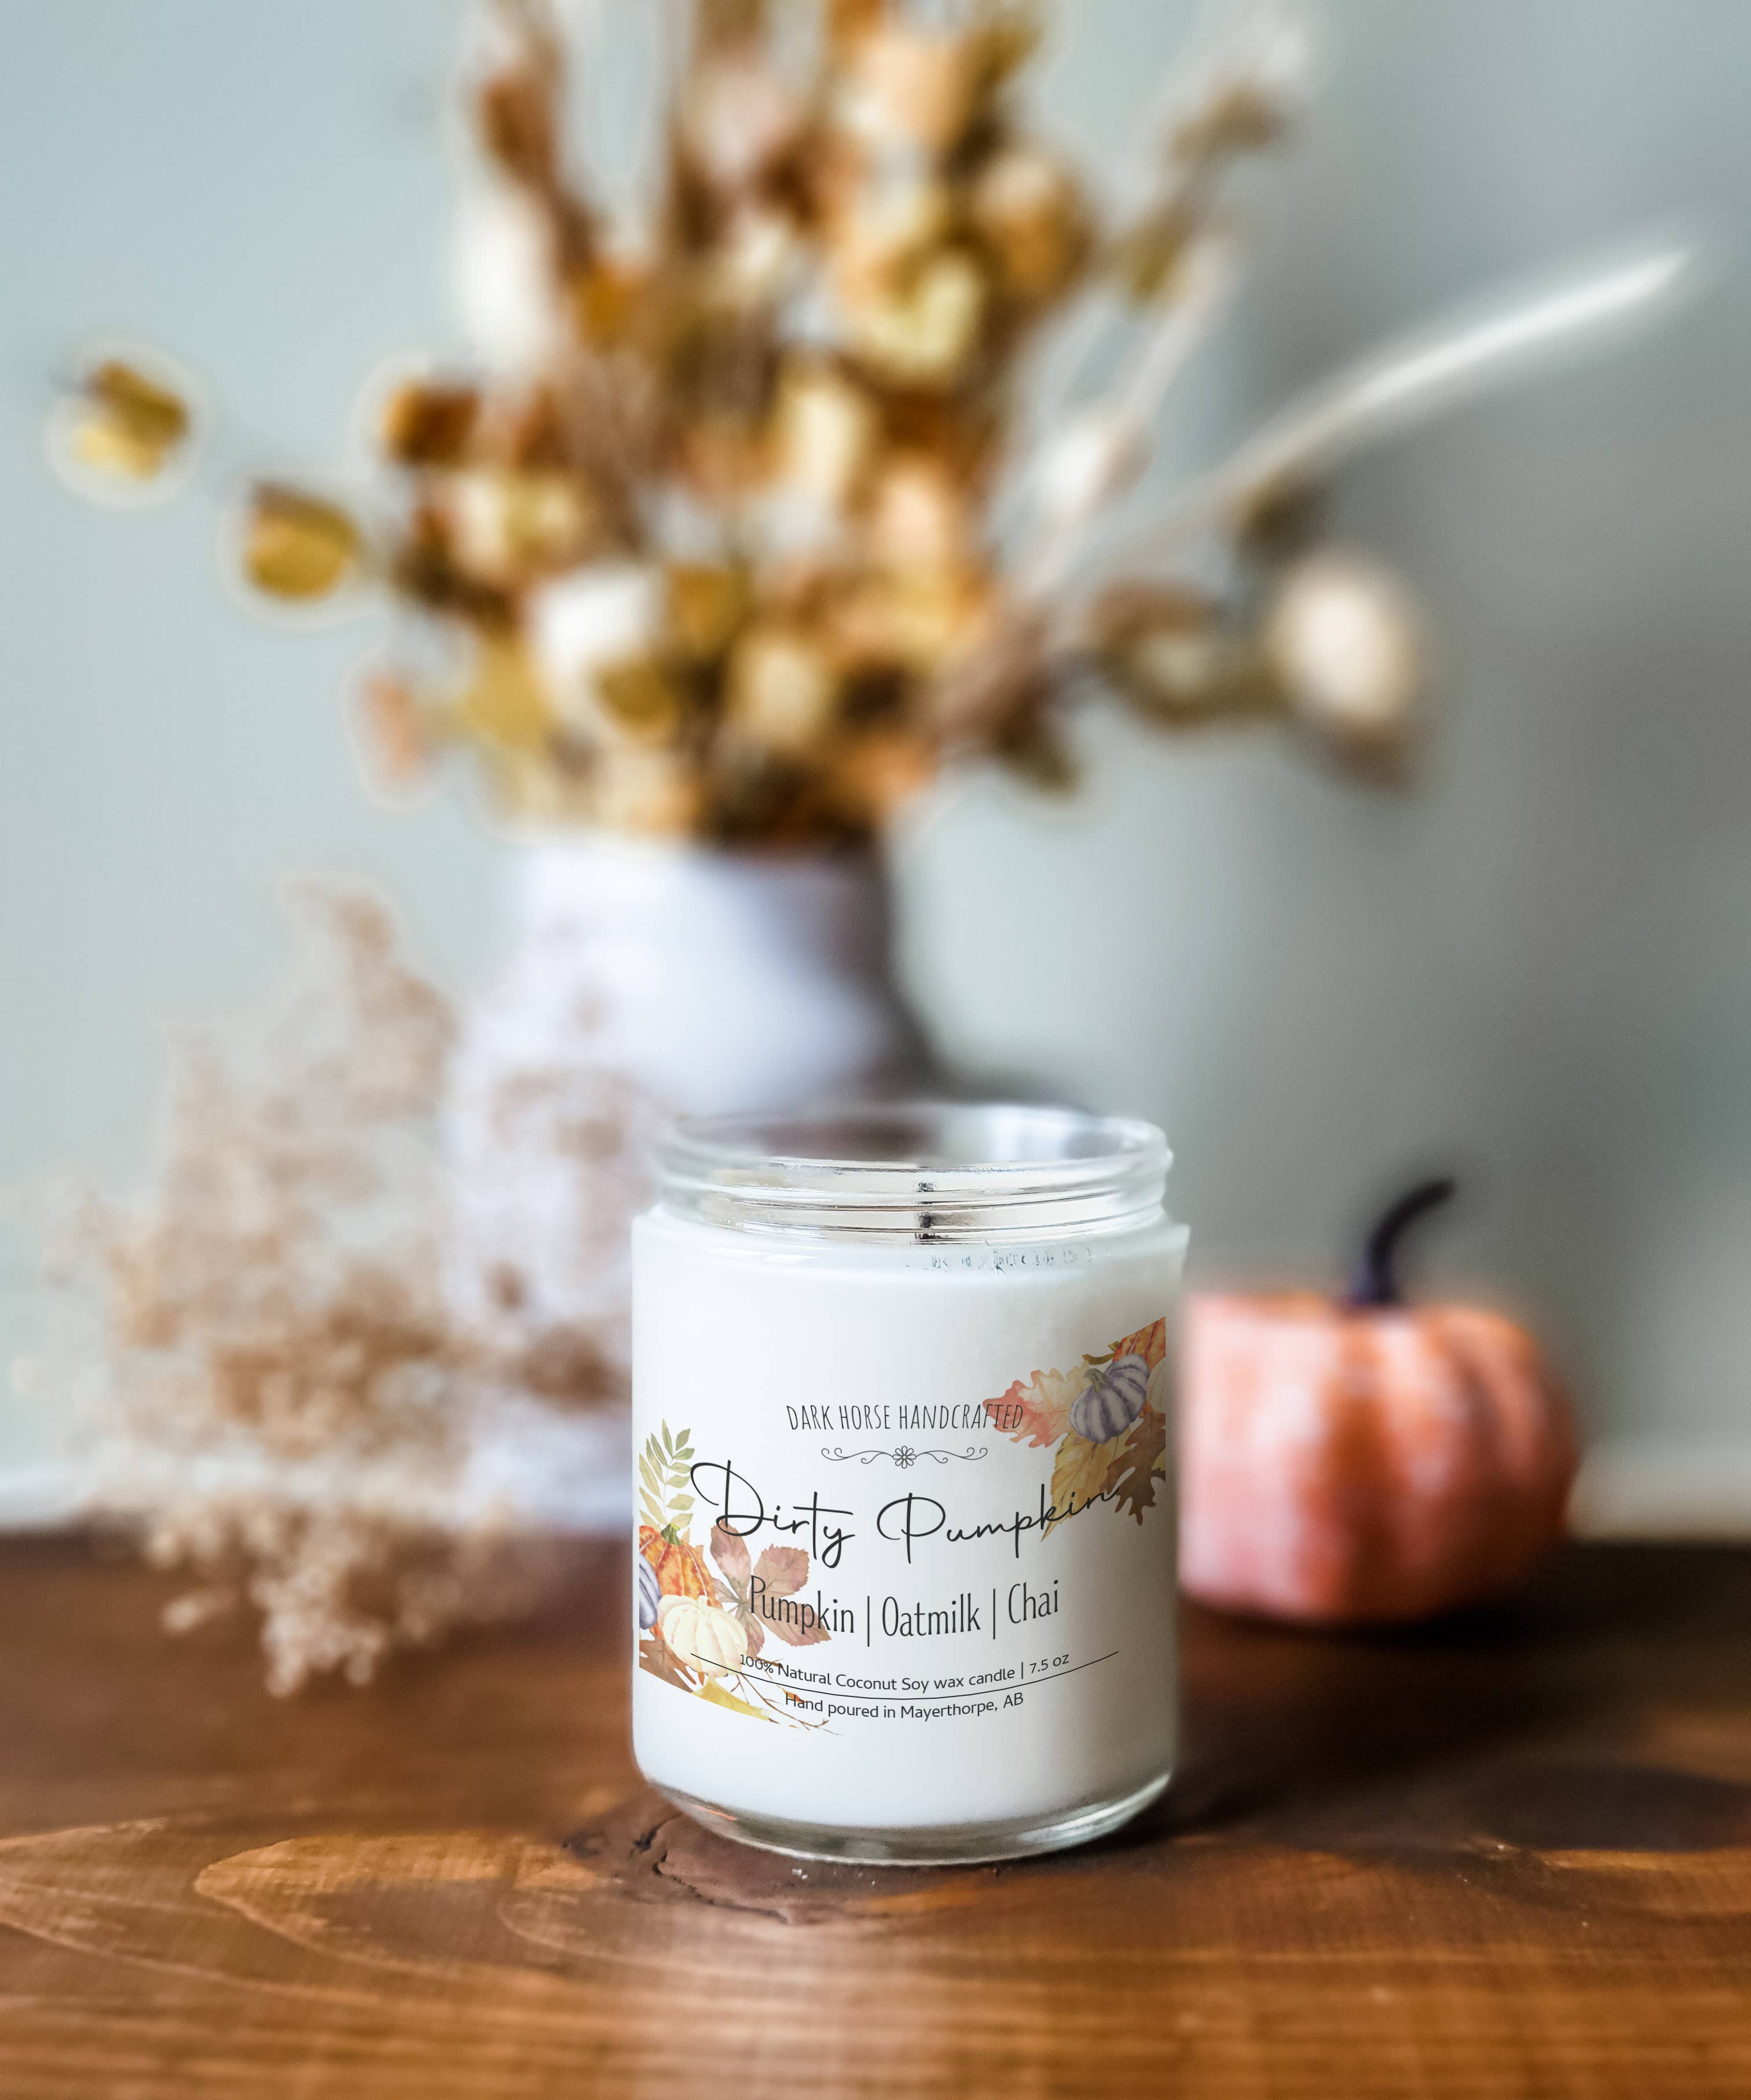 Dirty Pumpkin - Fall Season, Scented Coconut Soy Candle